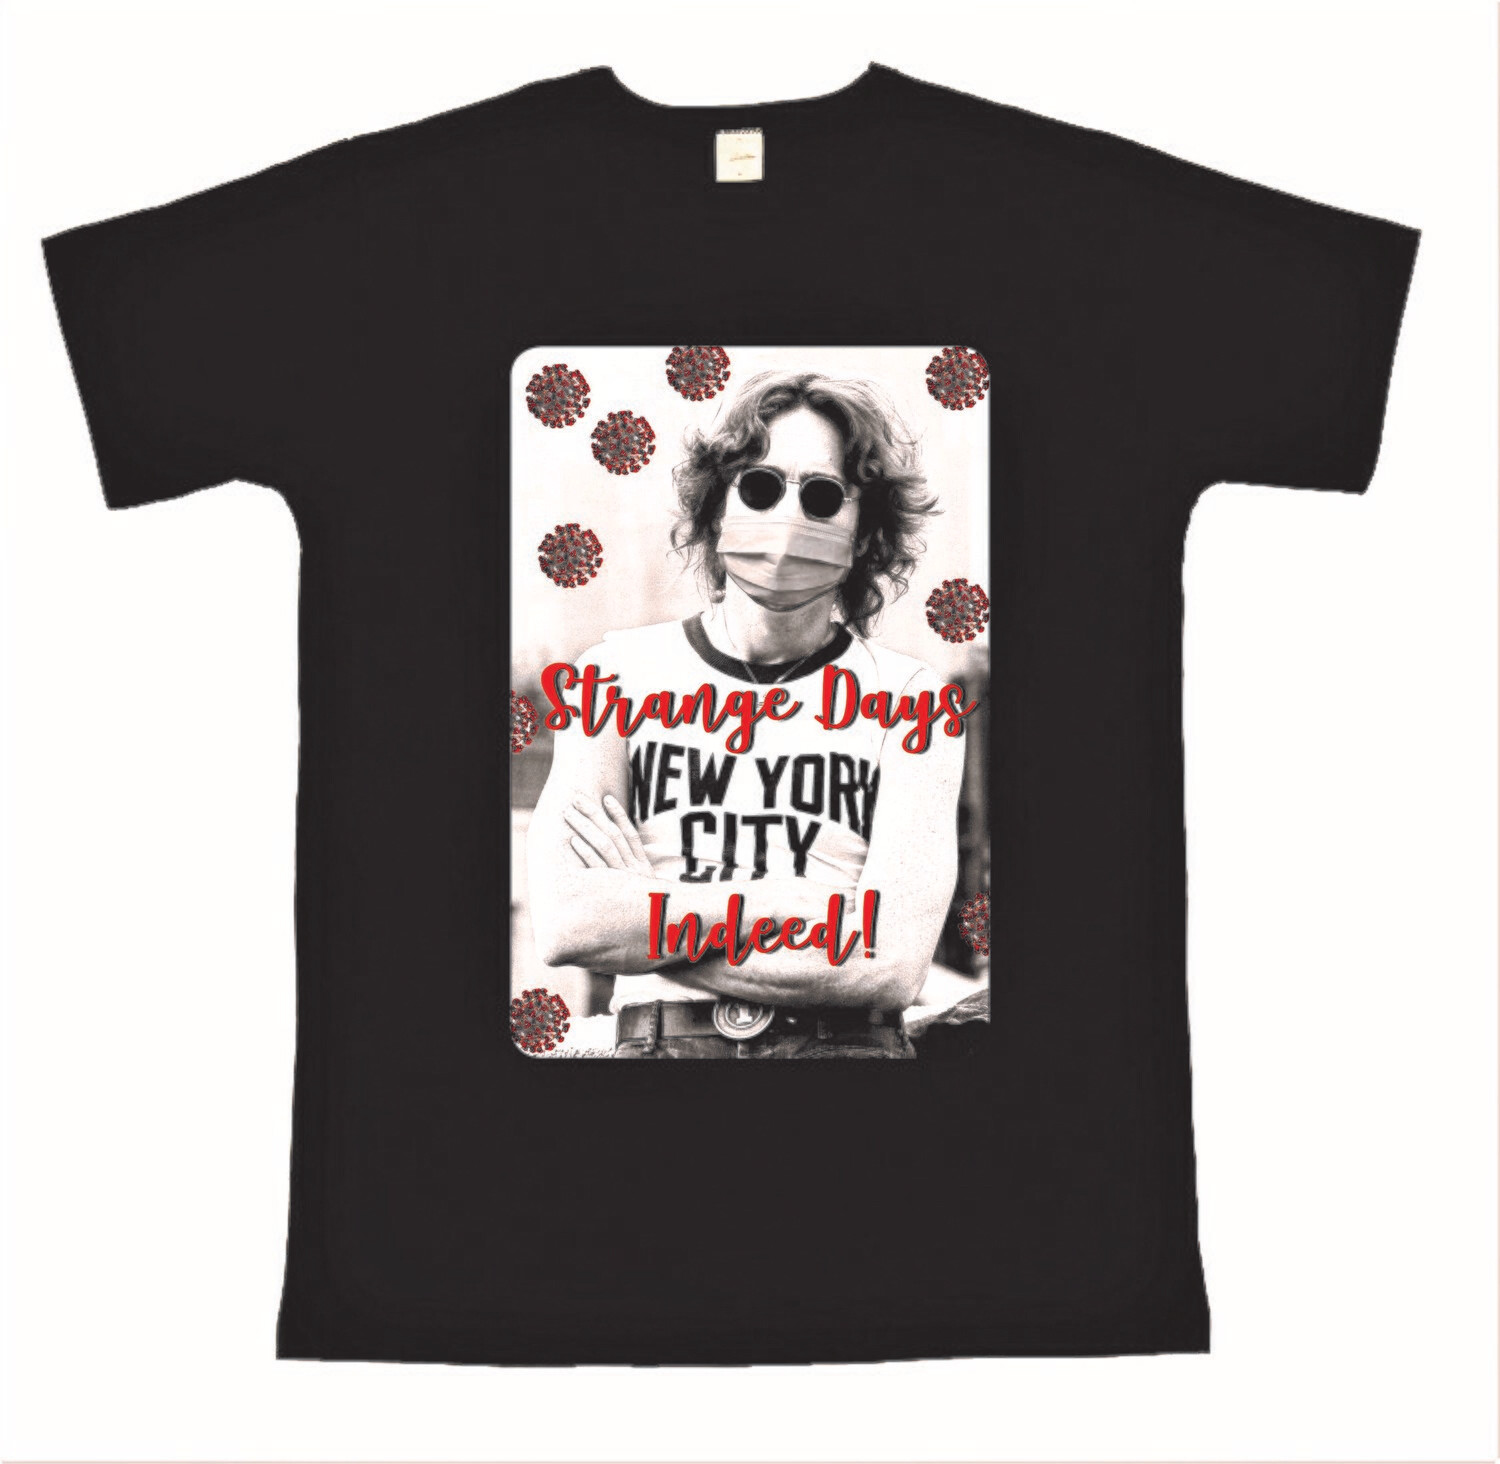 Strange Days John Lennon with Mask tee-shirt with shipping included.